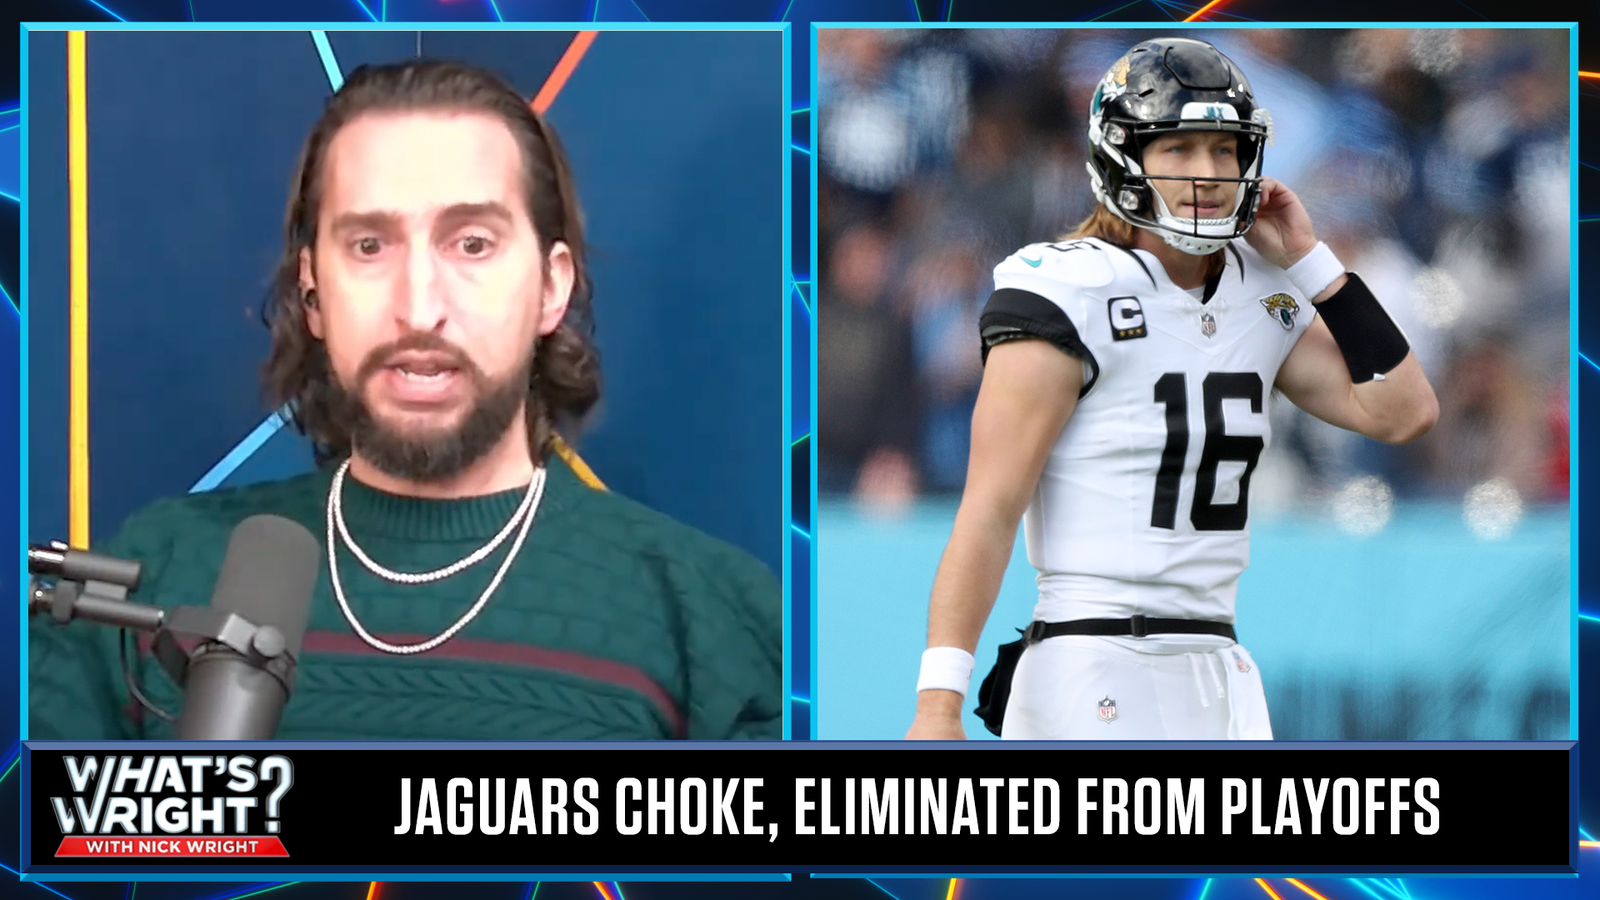 Nick Wright: Trevor Lawrence, Jags just couldn’t get the job done